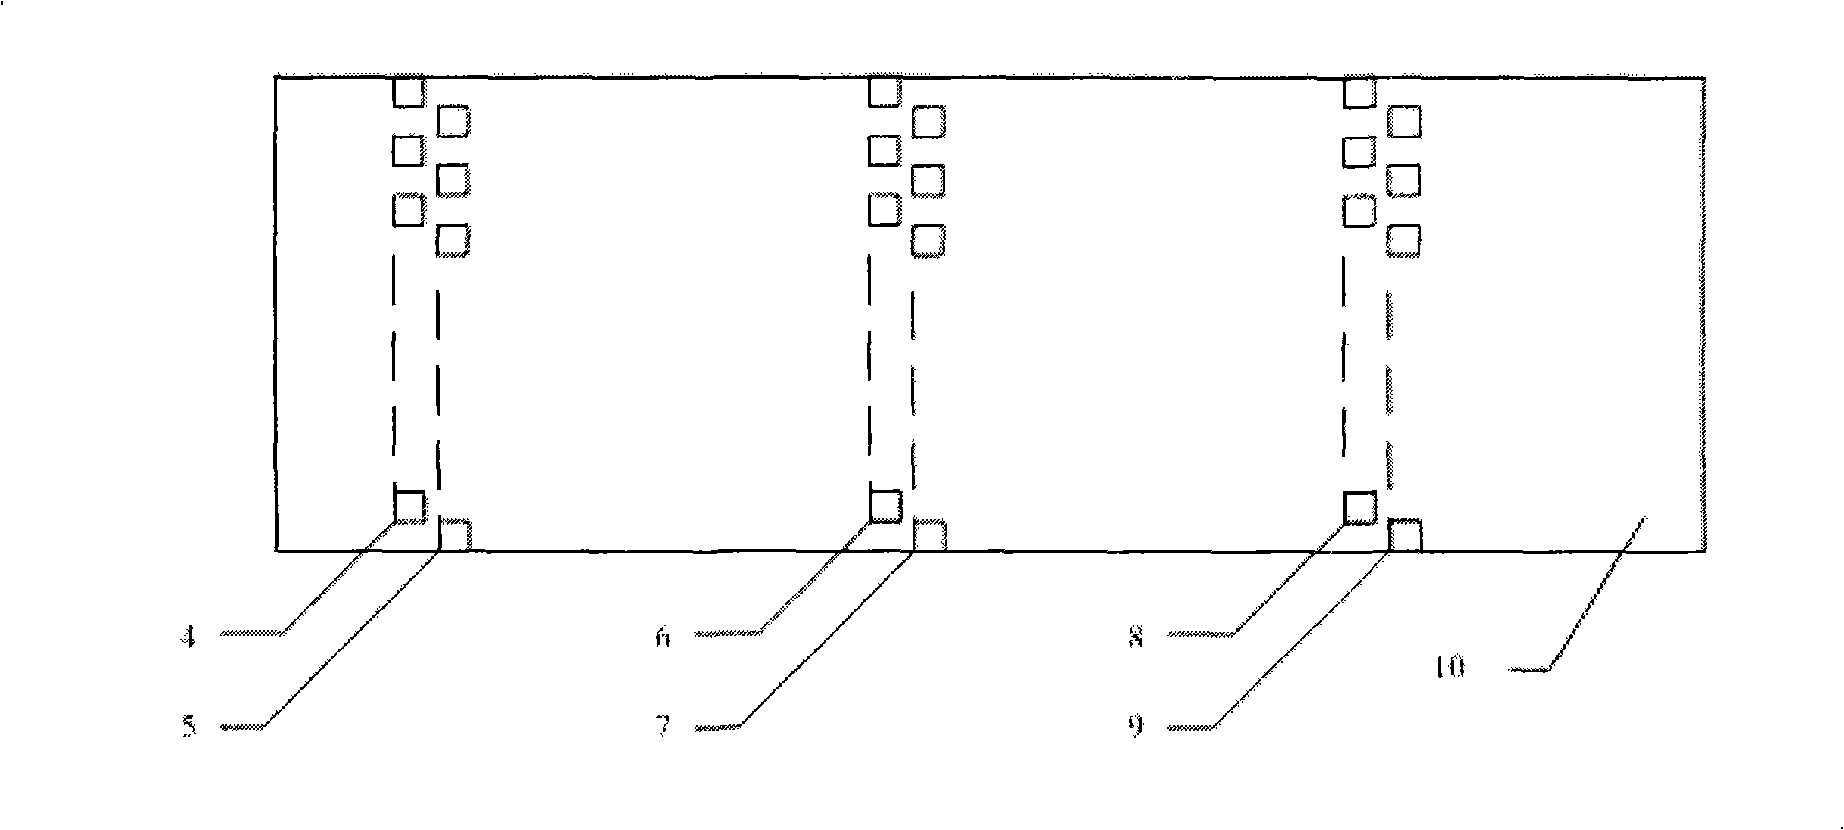 Multi-line array type LED plane based on rotation and stereo display